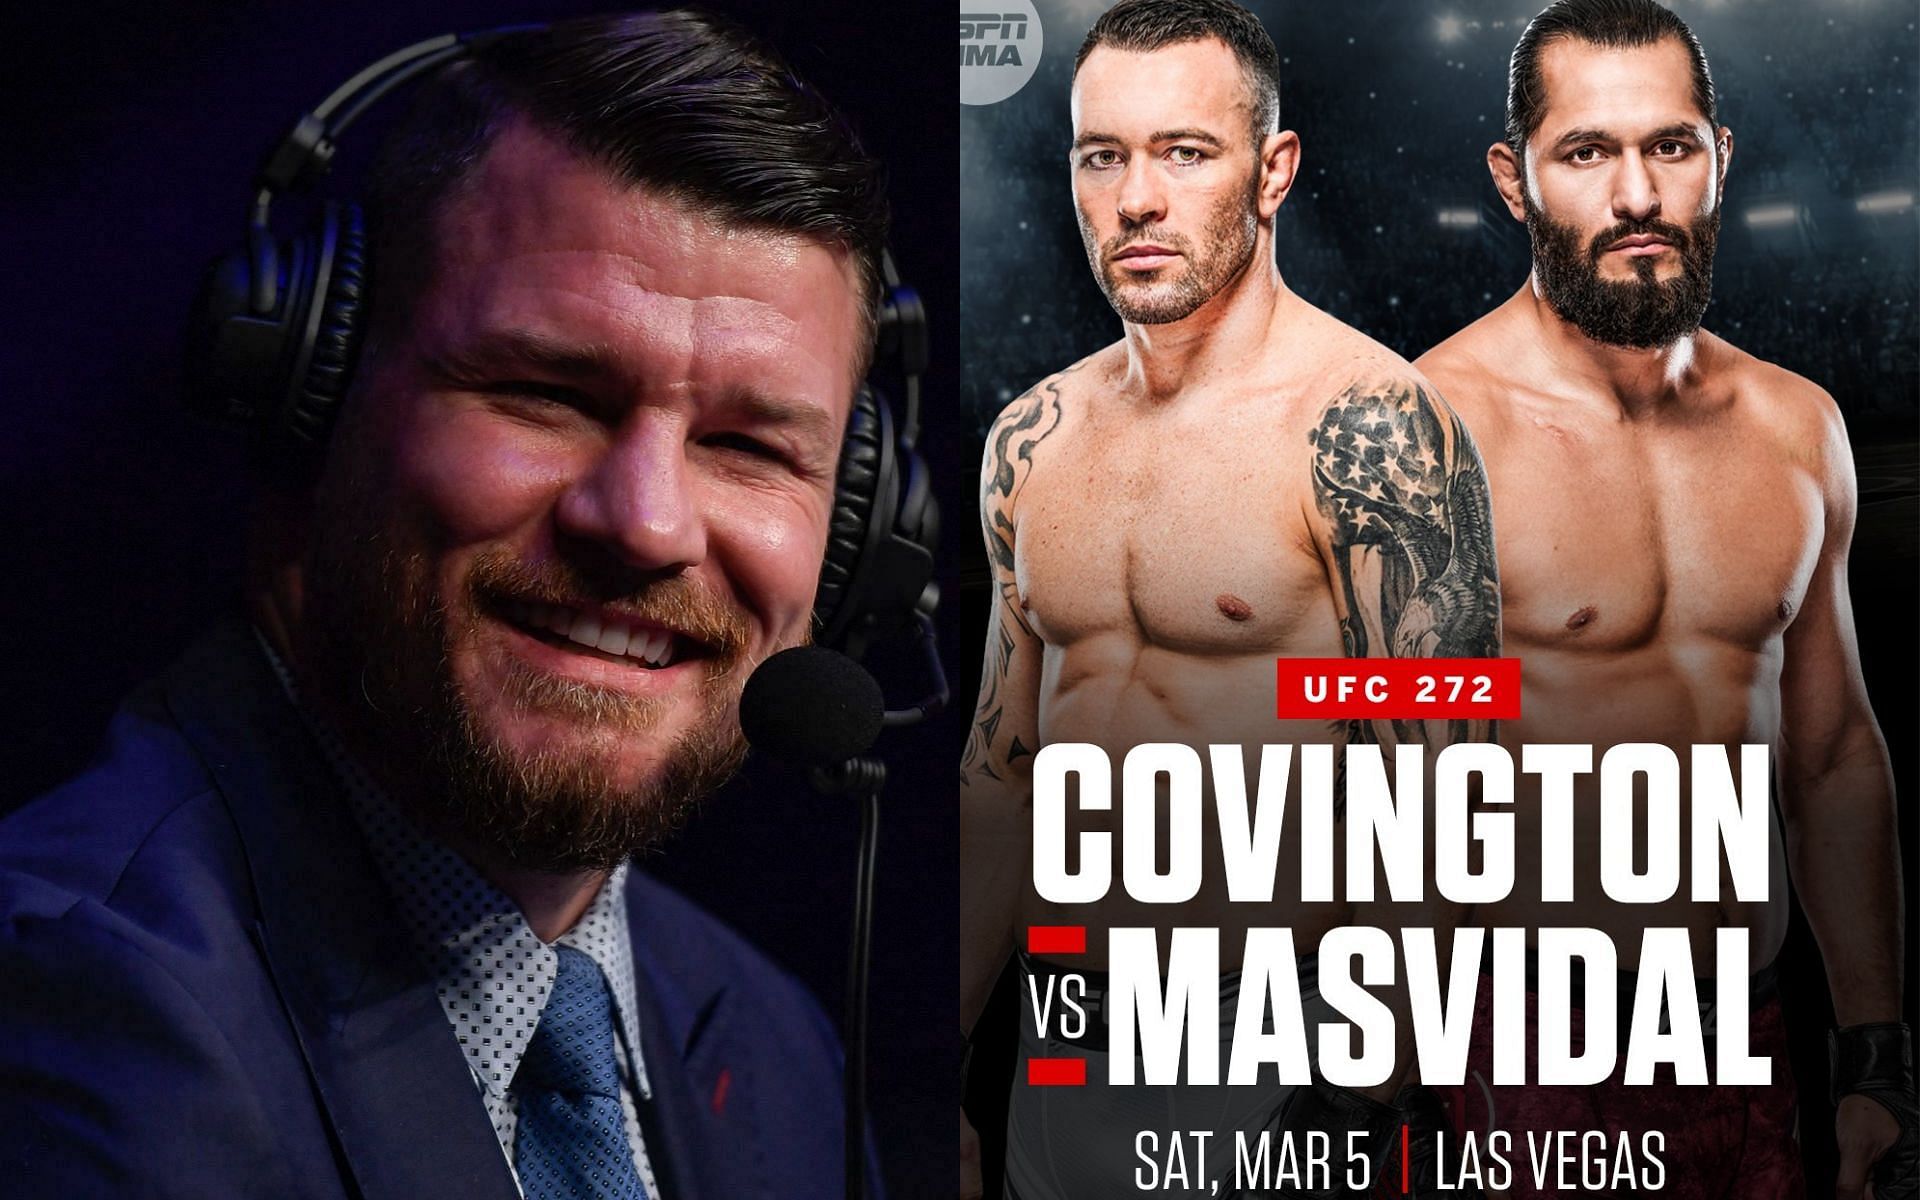 Michael Bisping (L), Colby Covington and Jorge Masvidal (R) [Image credits: @ESPN MMA on Twitter